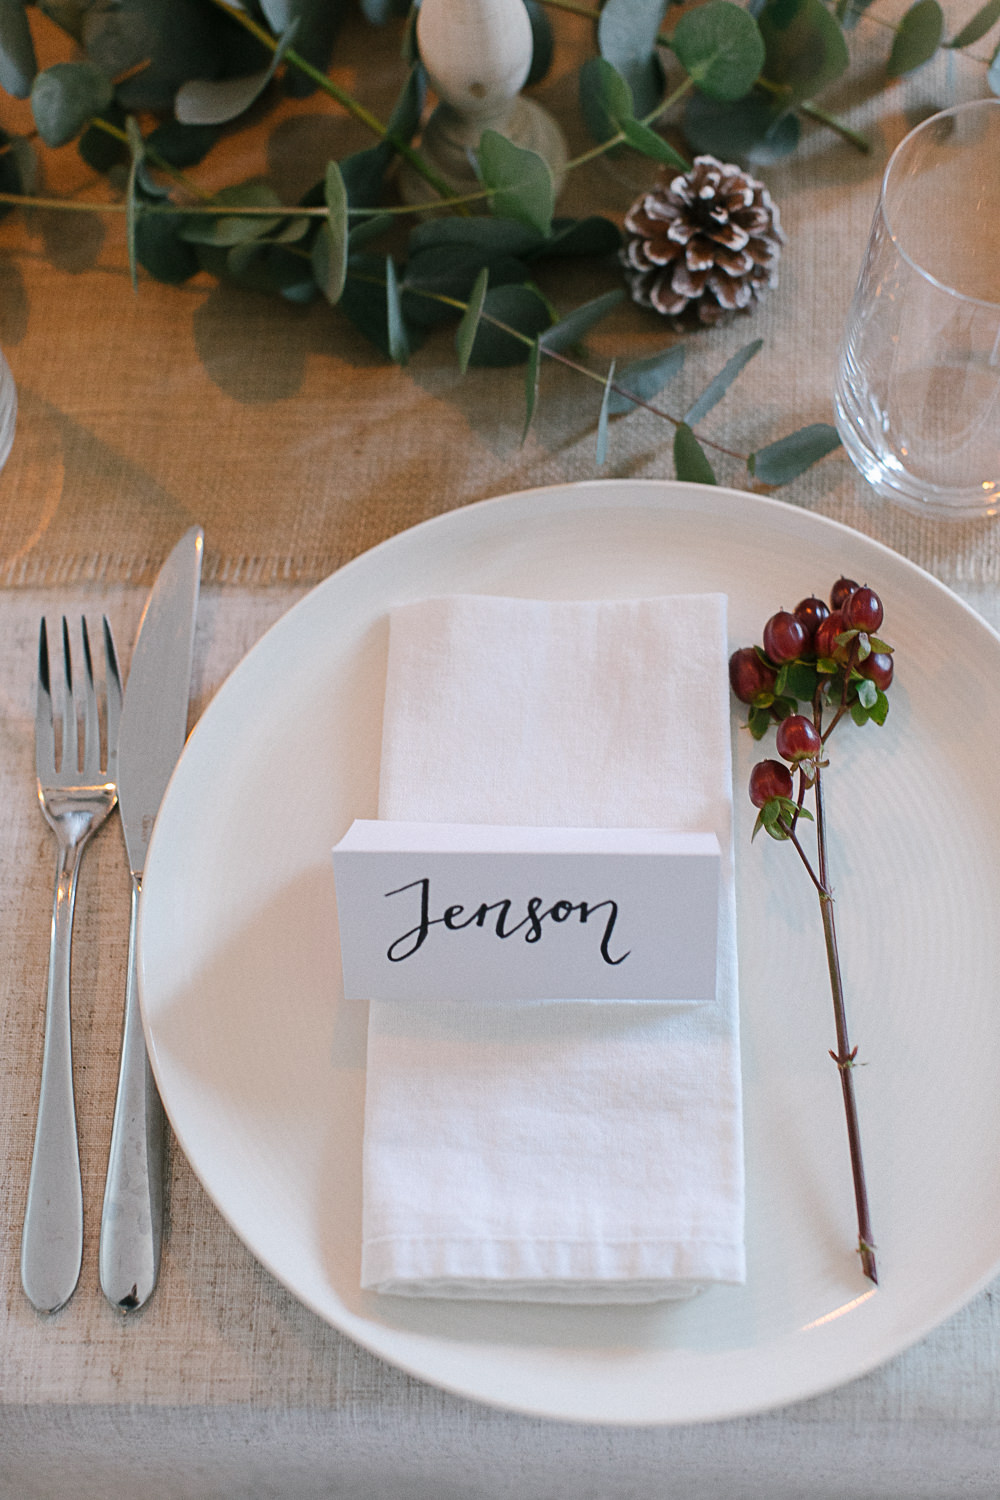 Festive tablescape with red berries and eucalyptus